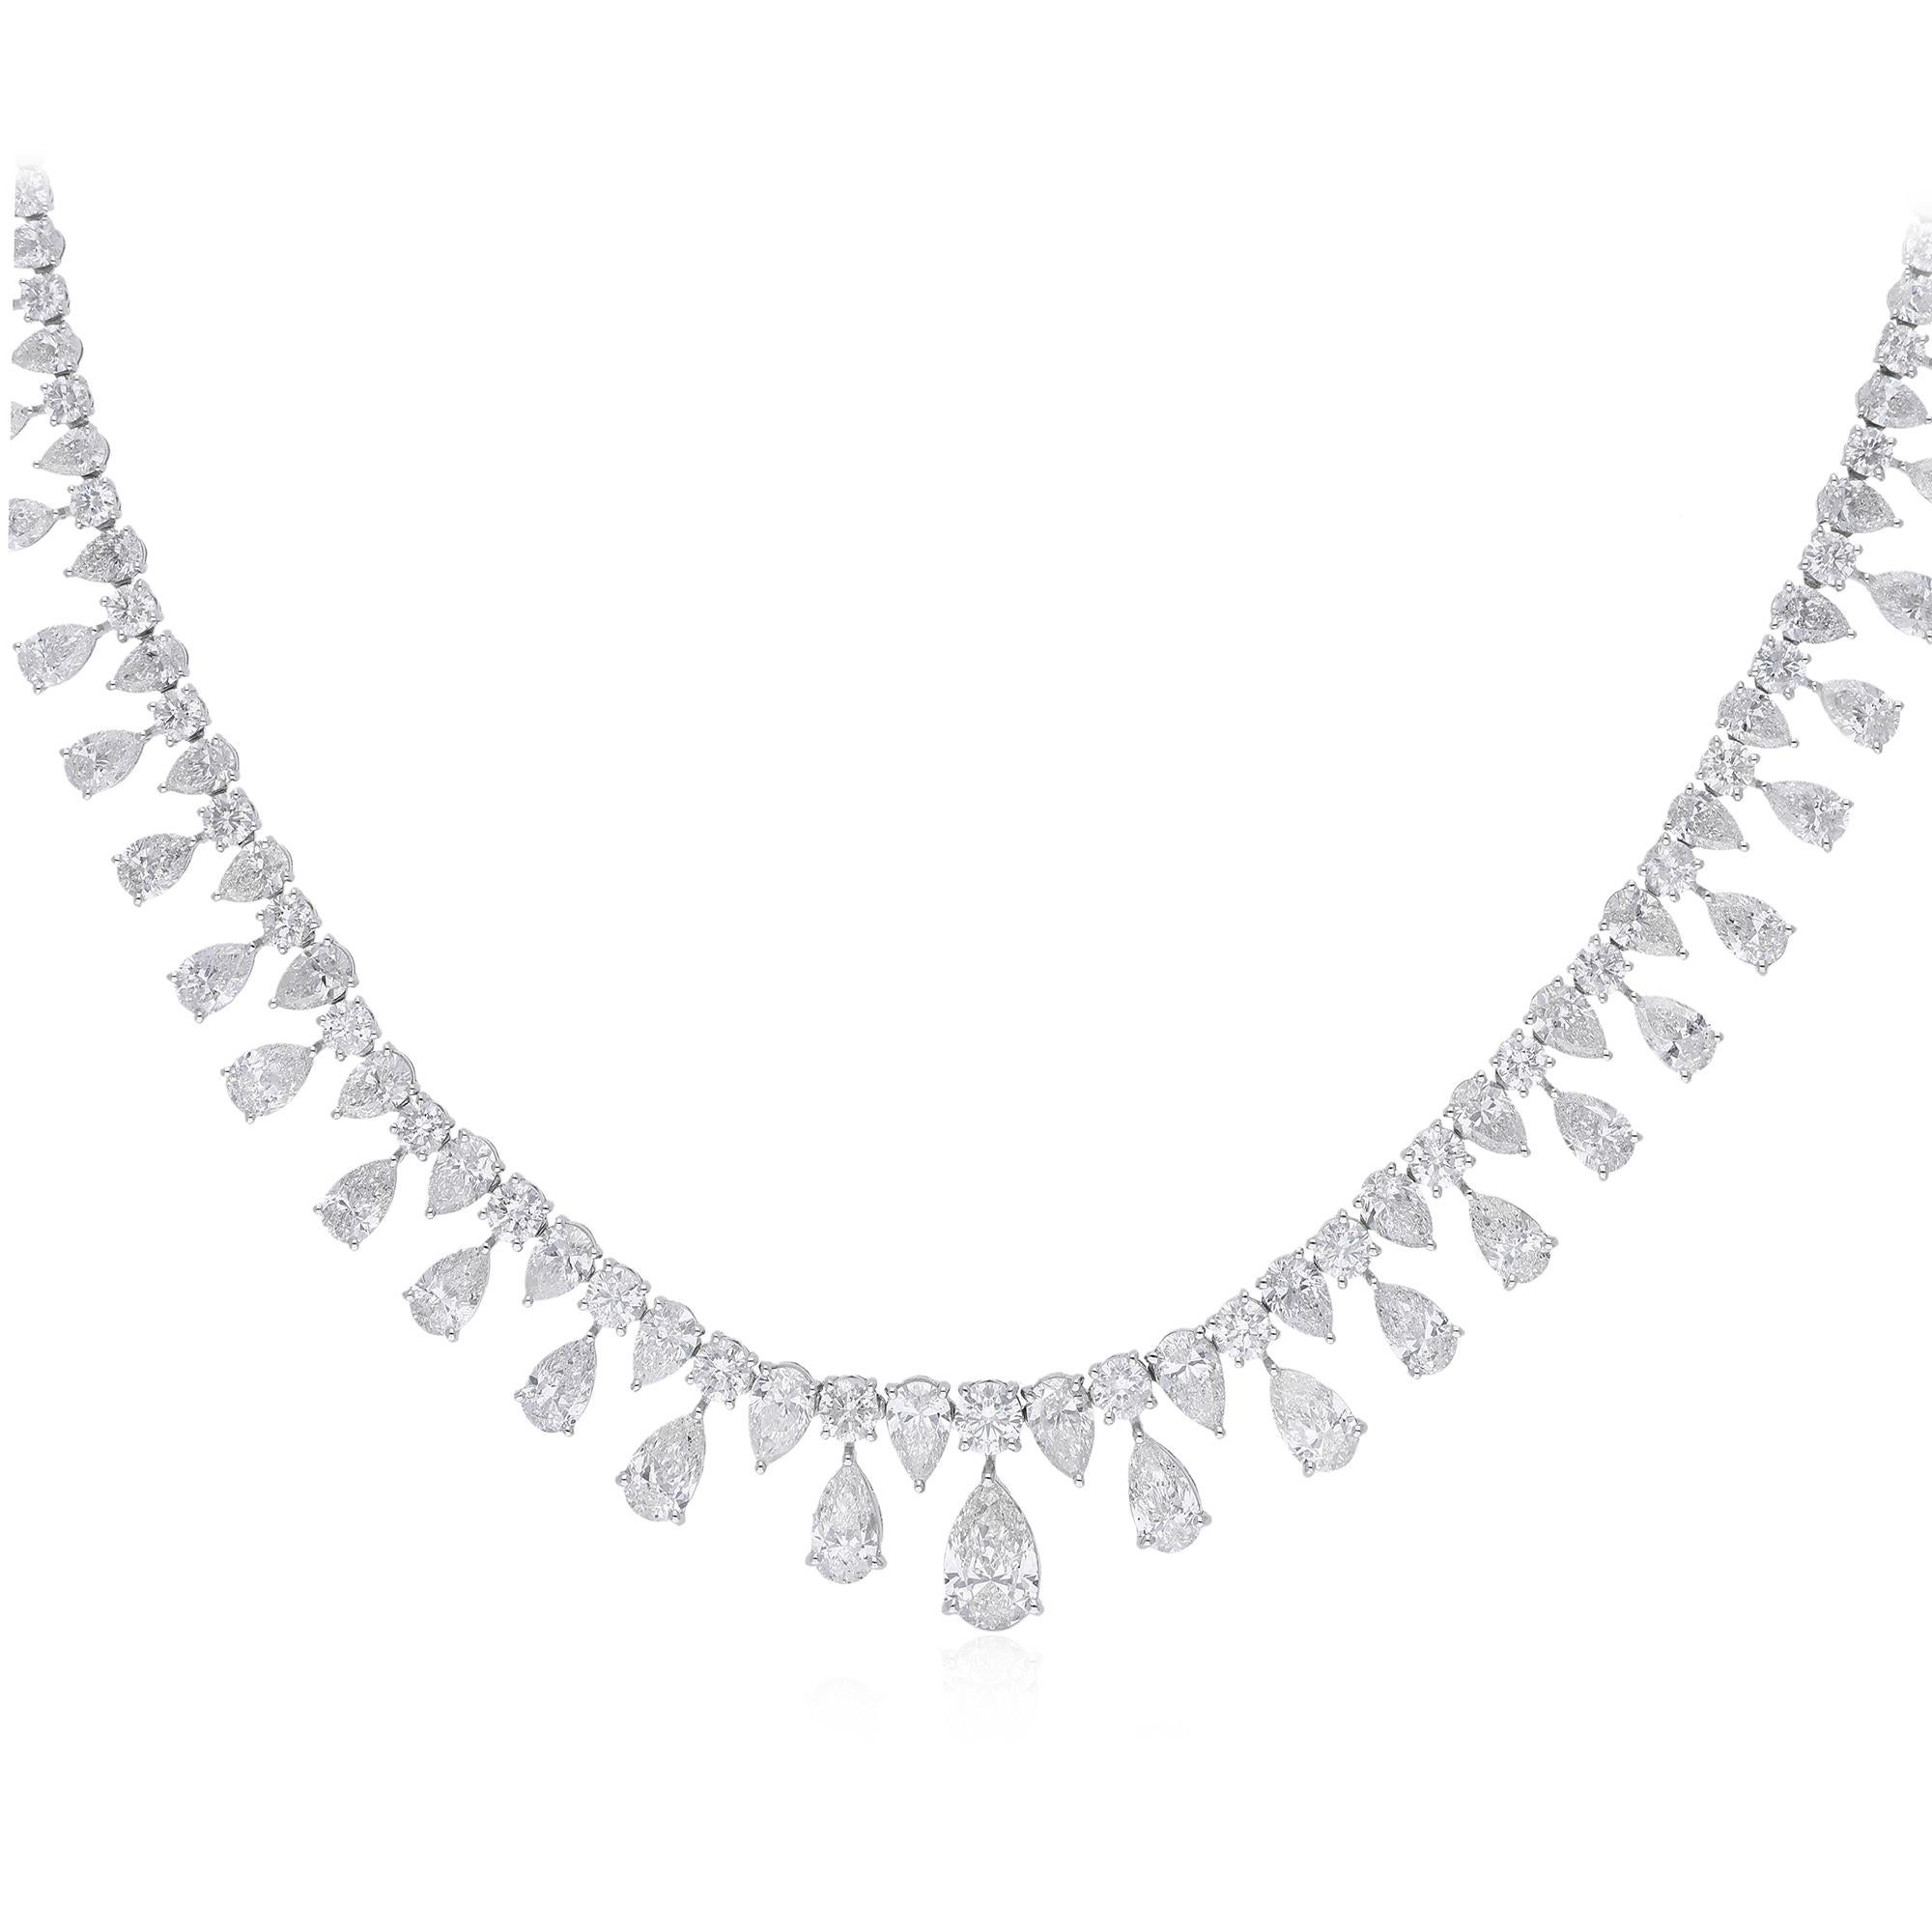 The design of the necklace is meticulously crafted to enhance the natural beauty of the diamonds while providing a perfect balance of glamour and refinement. The fluid lines of the pear-shaped centerpiece seamlessly transition into a delicate chain,